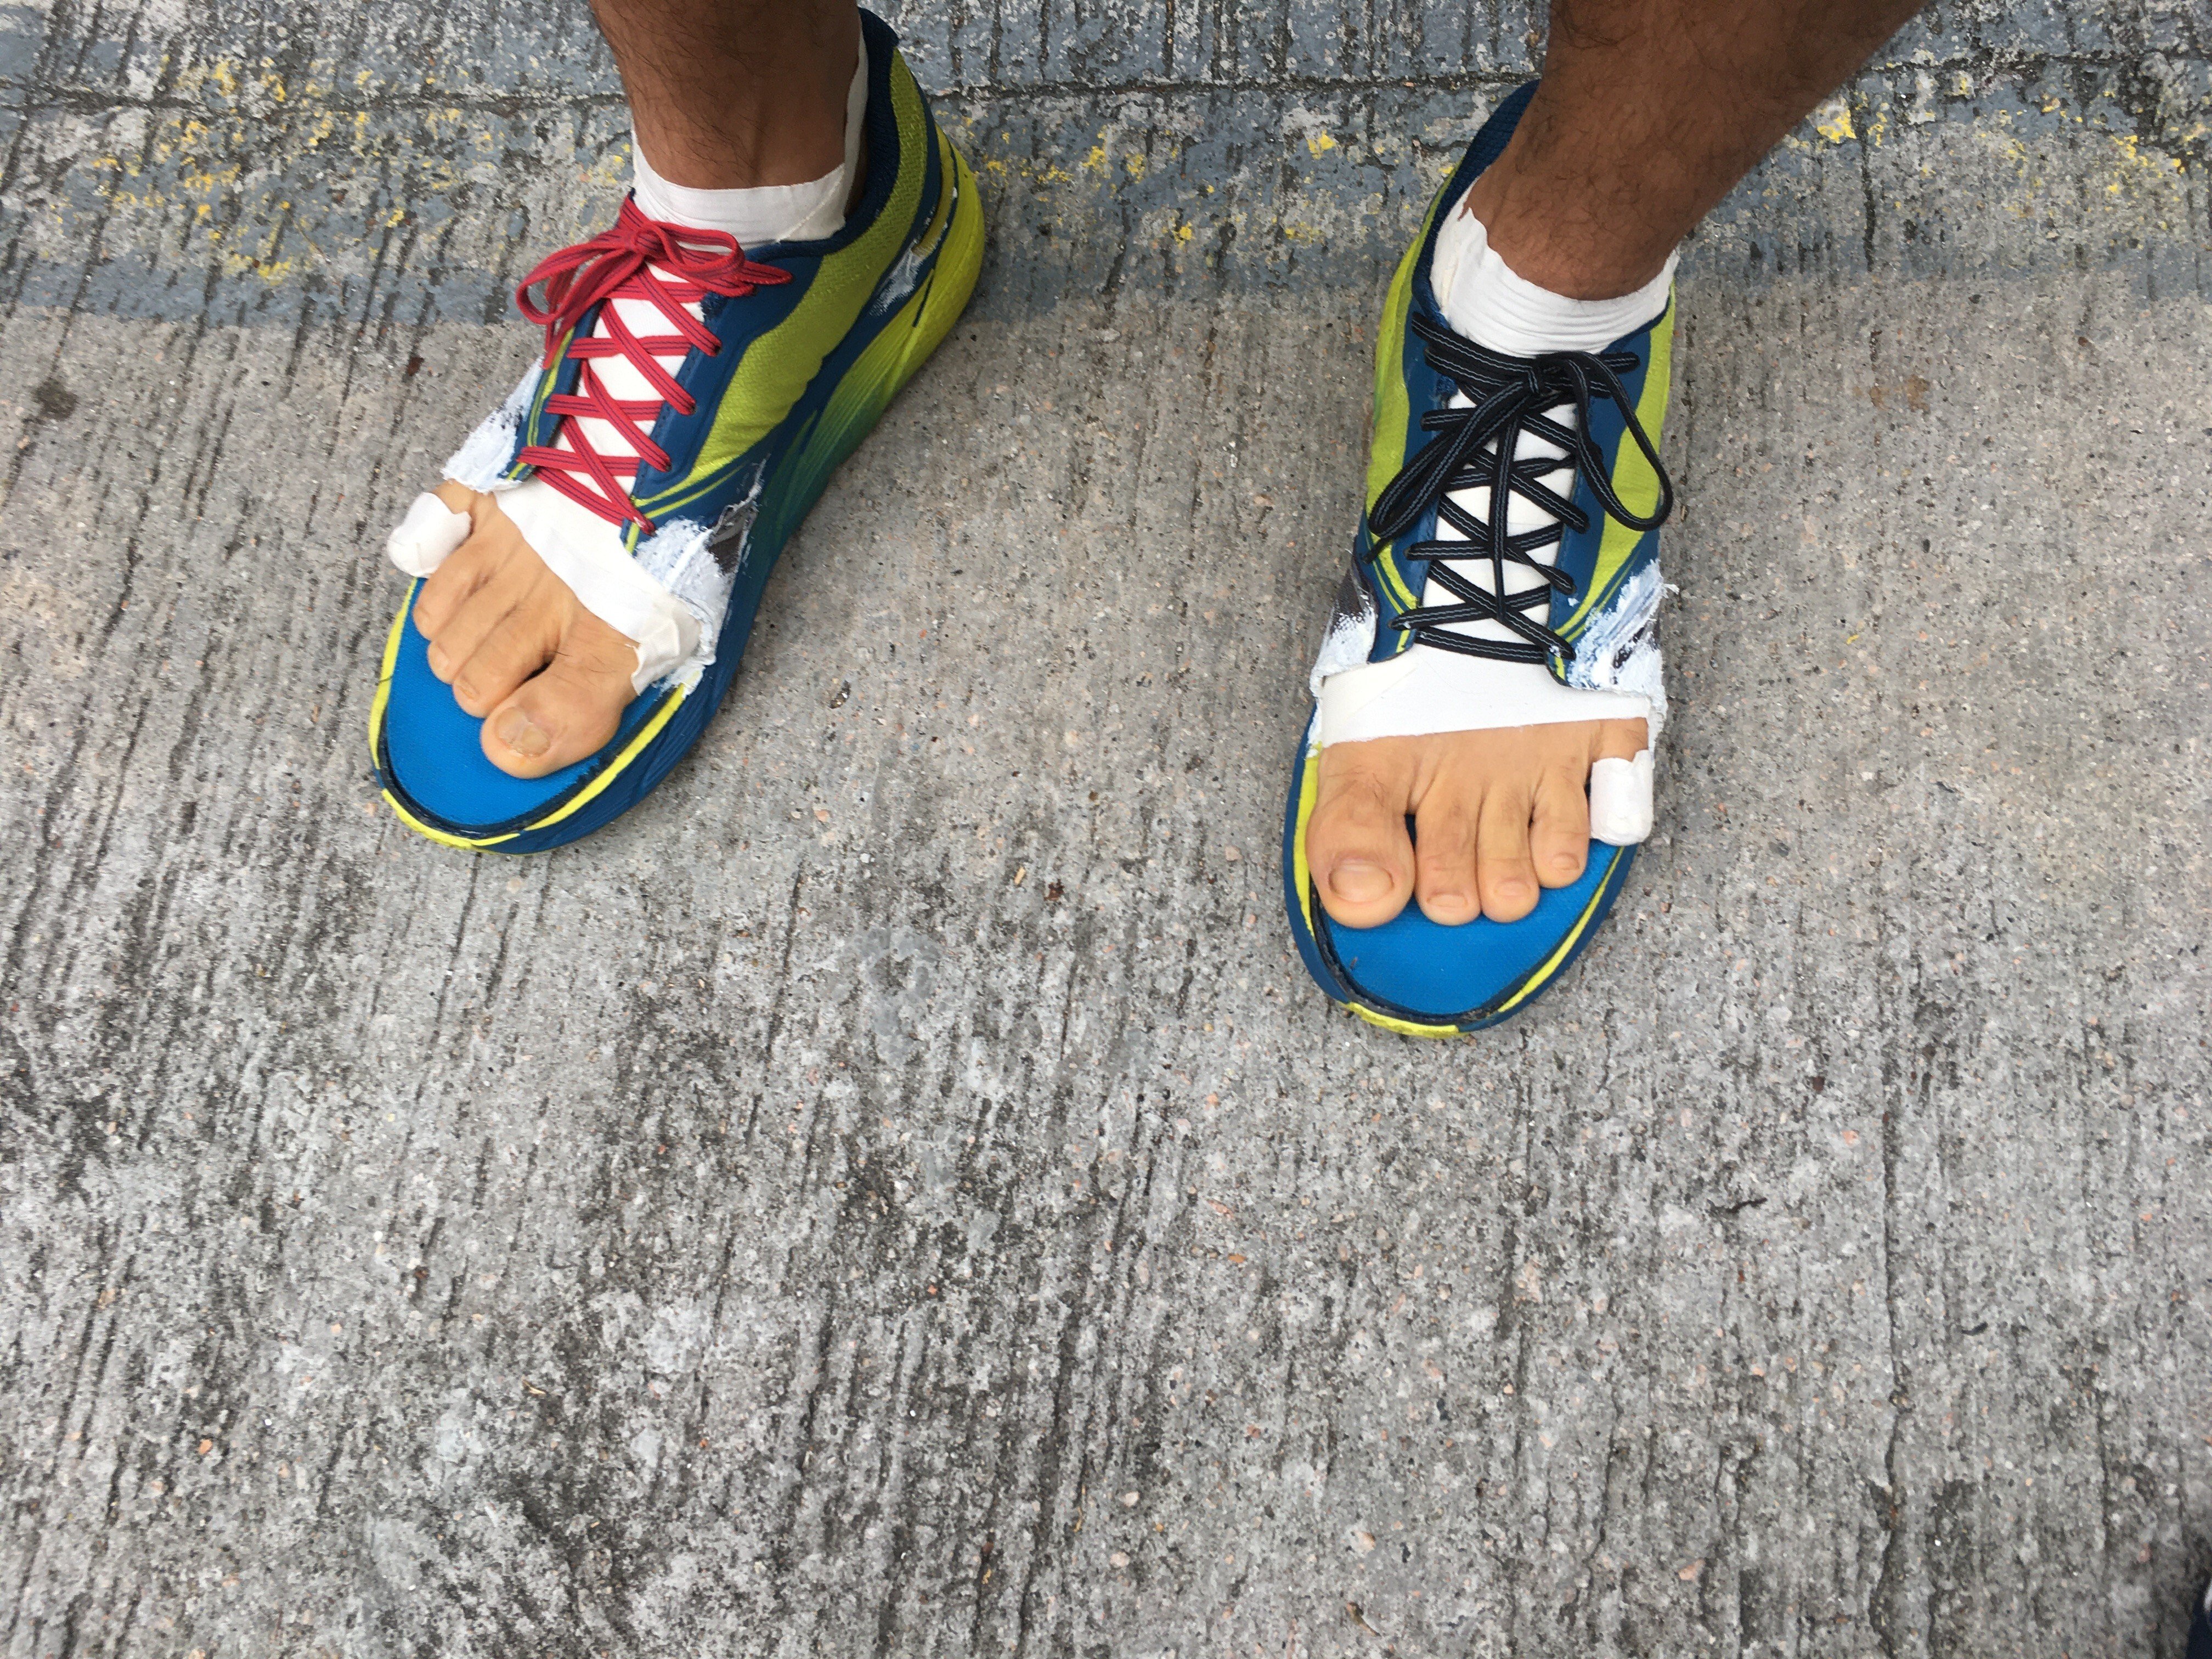 Phairat Varasin, a finisher of the 298km Hong Kong Four Trails Ultra Challenge, has modified his shoes for more toe room. Photo: Mark Agnew